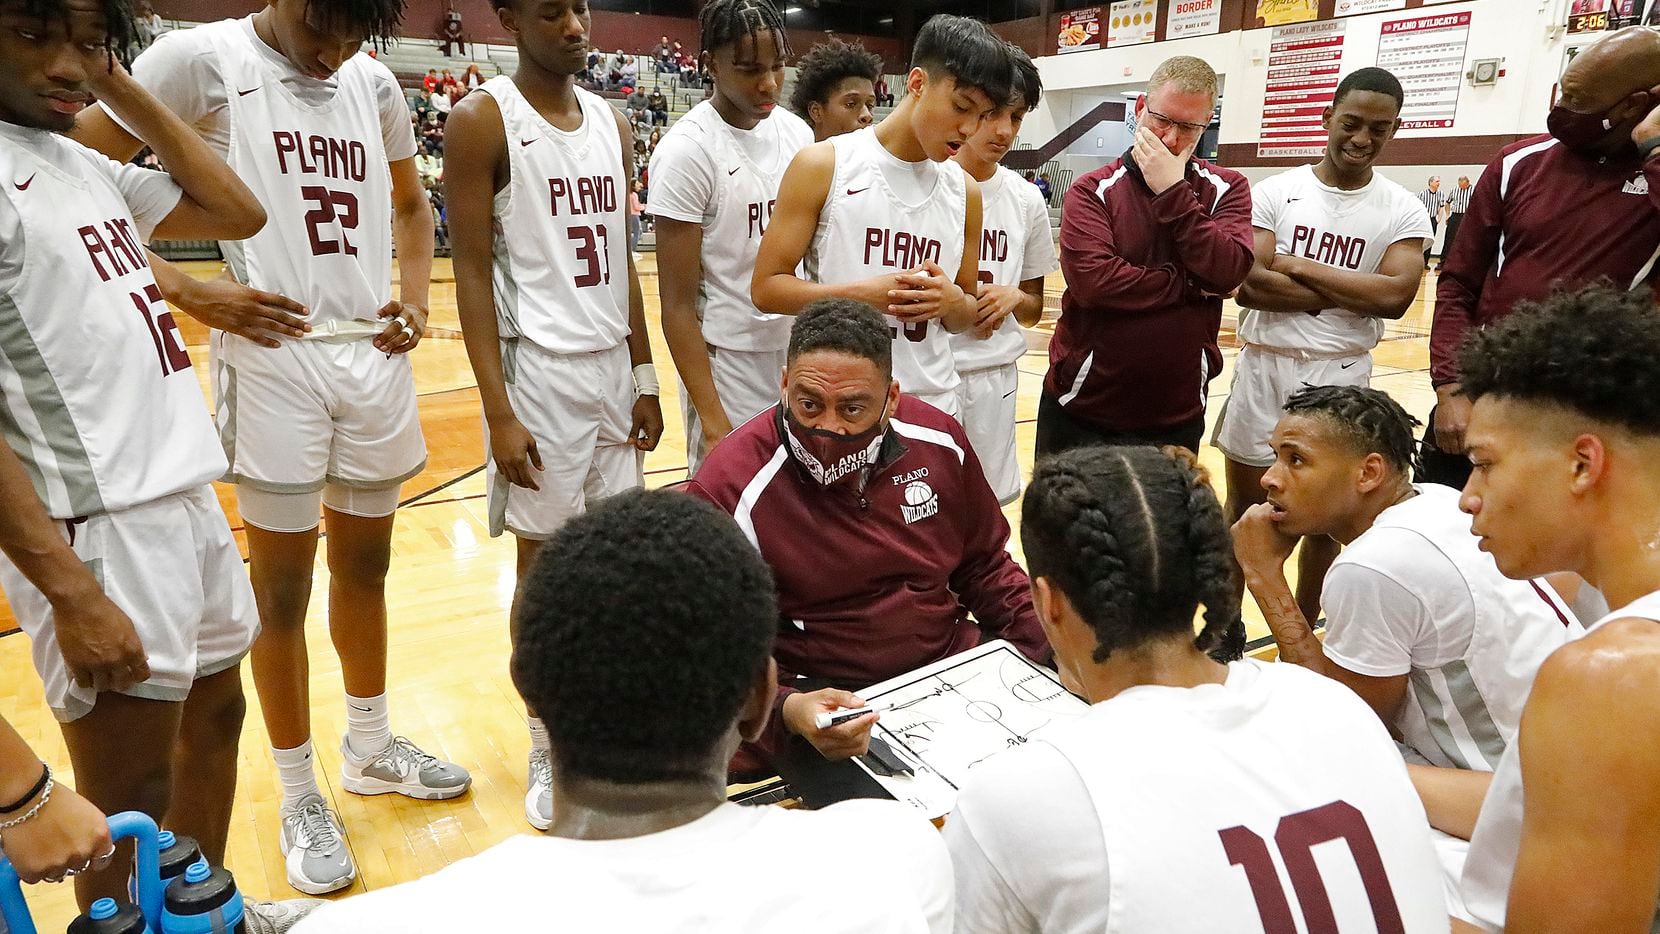 Plano Senior High School head coach Dean Christian draws up a play during a time out in the second half as Plano High School hosted Flower Mound High School in a basketball game played in Plano on Tuesday, January 11, 2021. (Stewart F. House/Special Contributor)